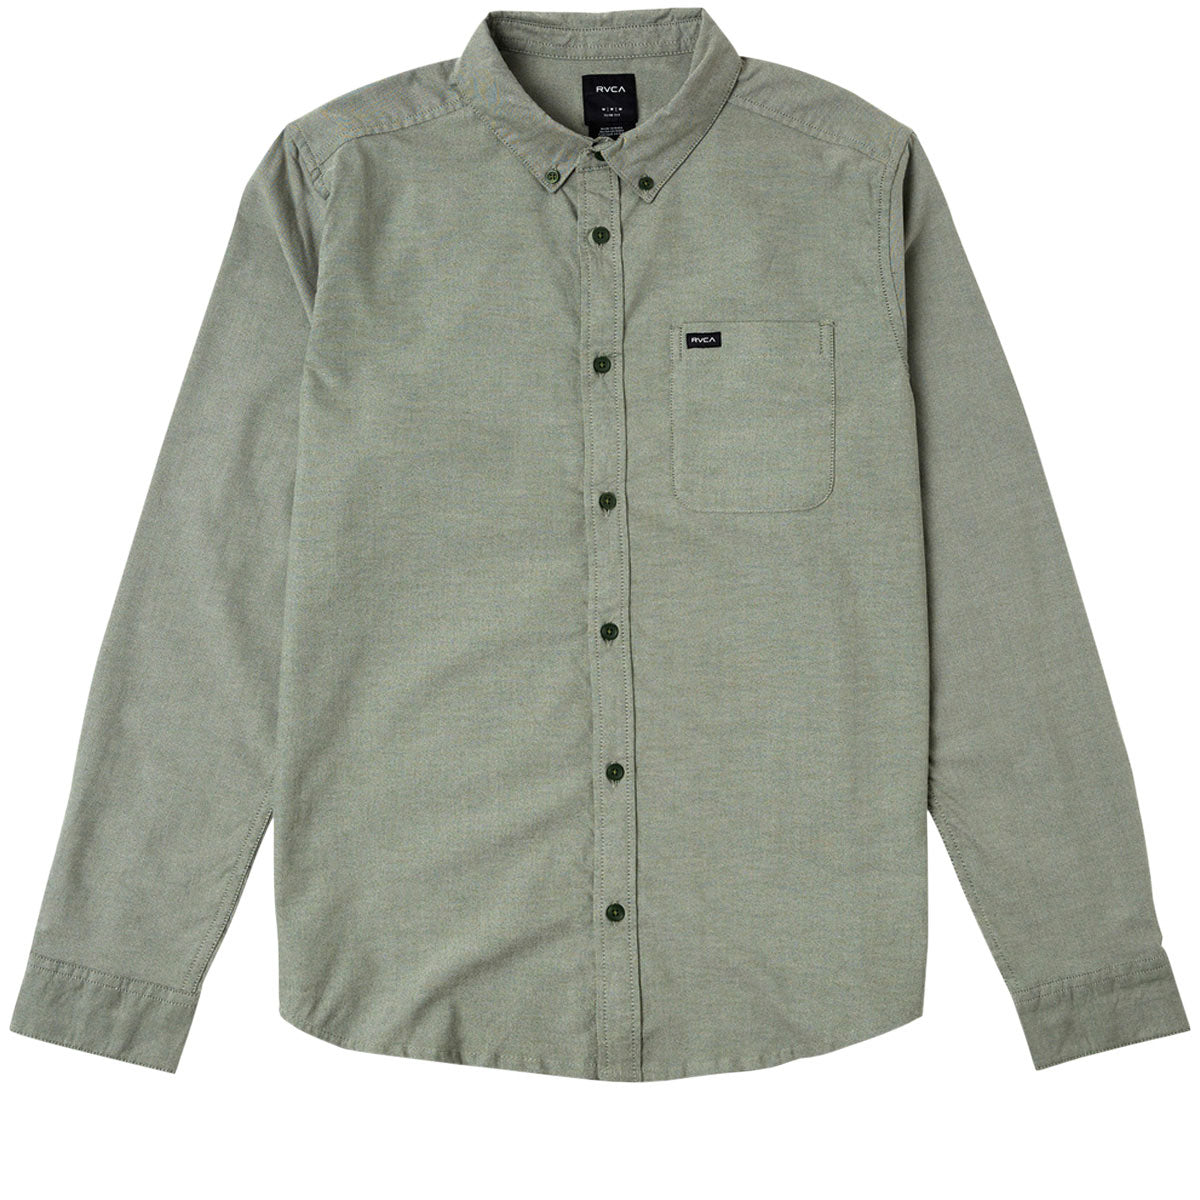 RVCA That'll Do Stretch Long Sleeve Shirt - College Green image 3